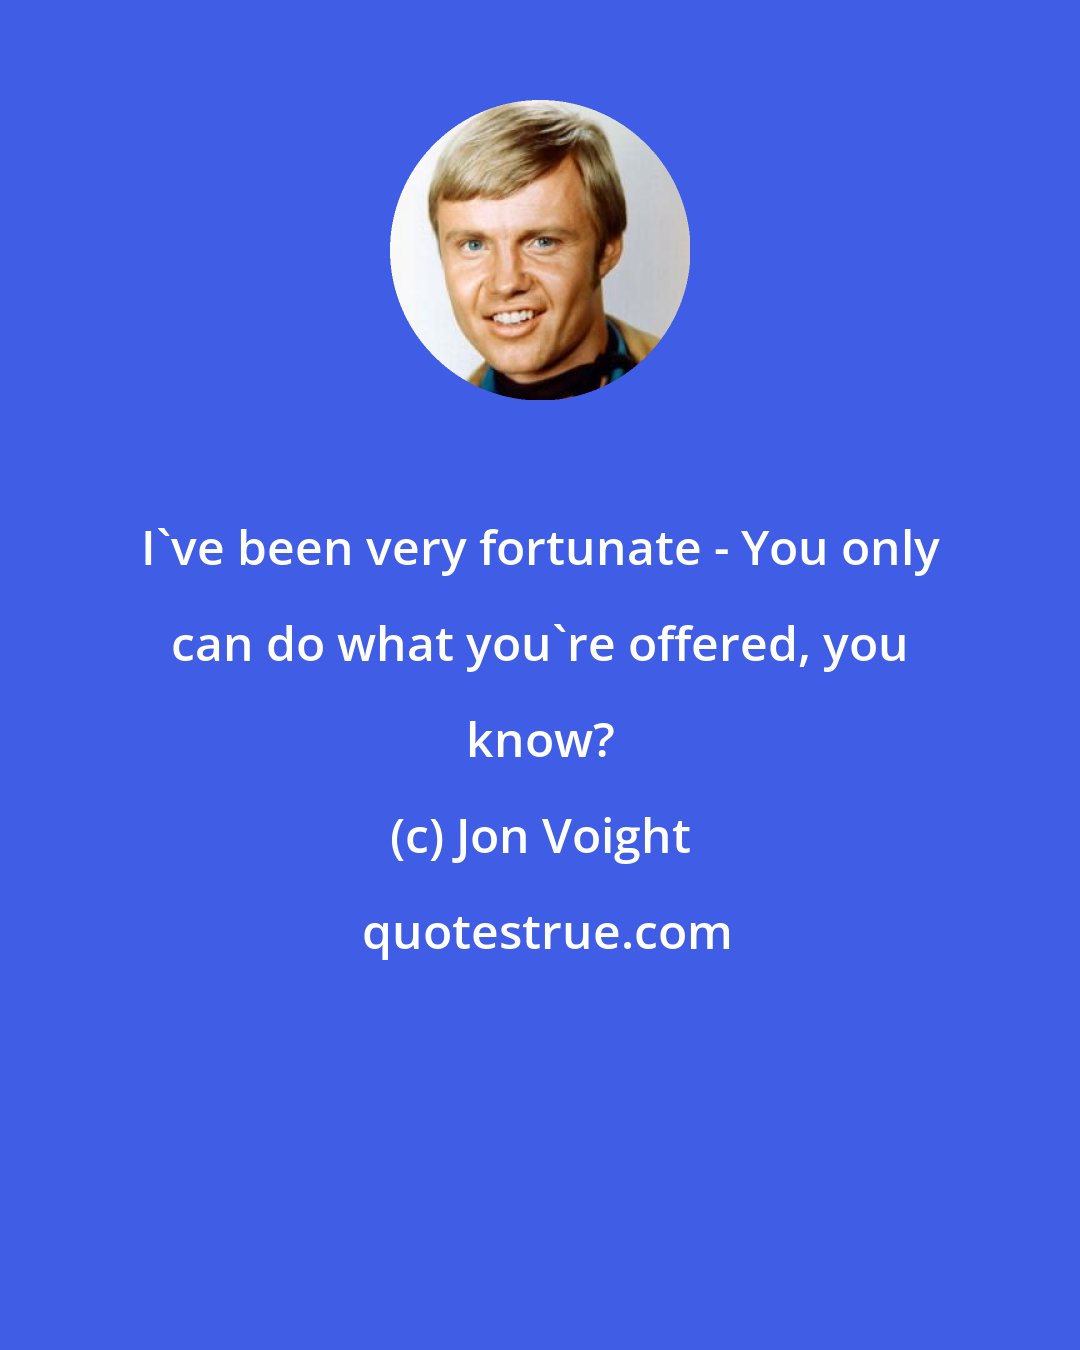 Jon Voight: I've been very fortunate - You only can do what you're offered, you know?